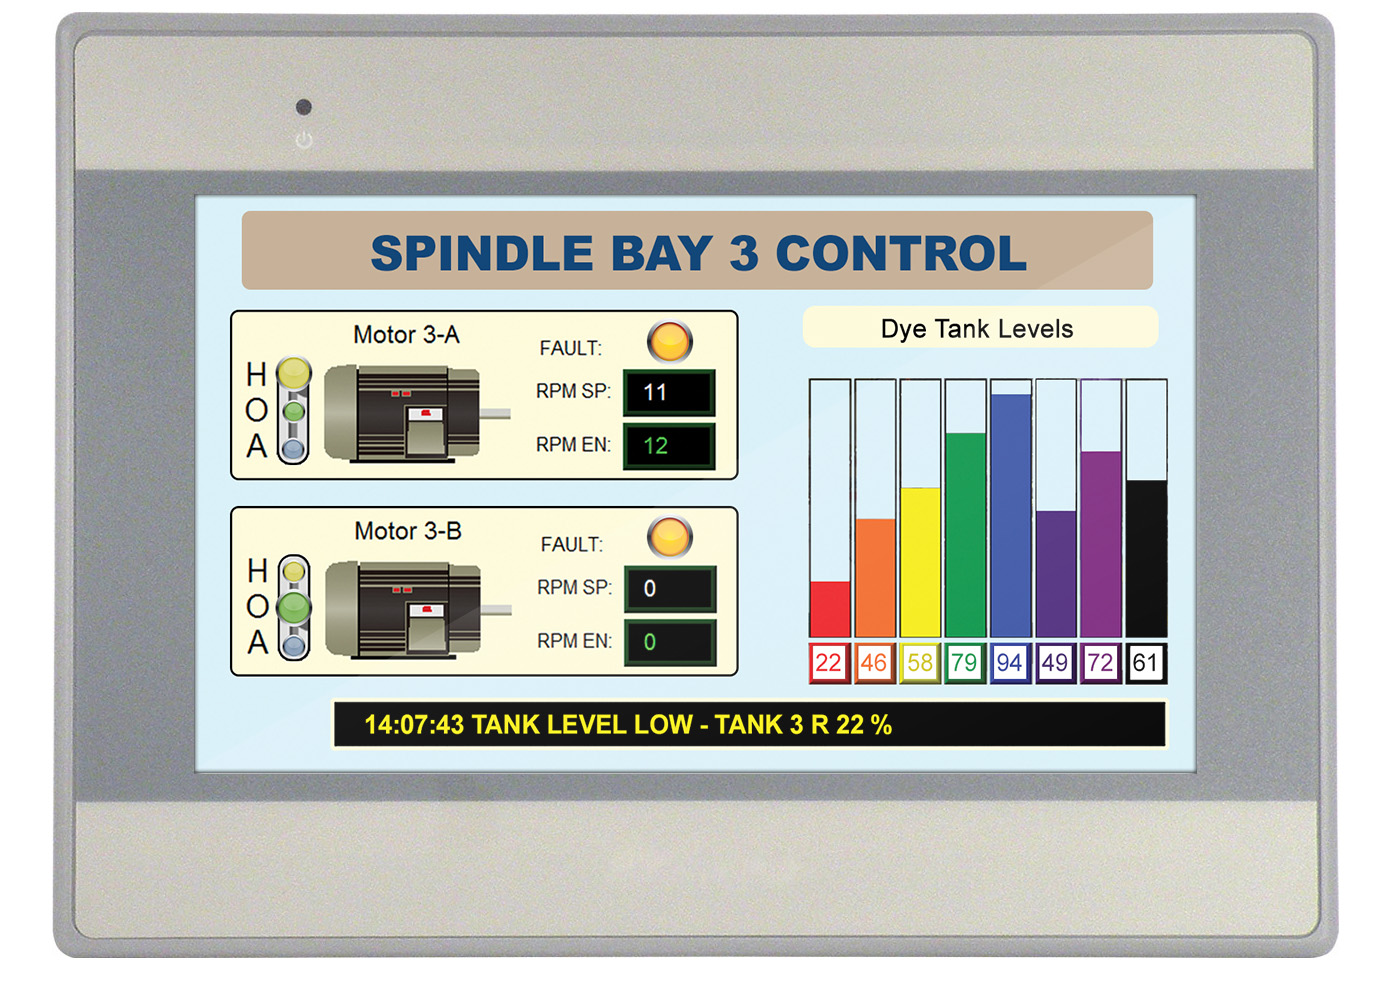 7 inch Advanced HMI with Touchscreen and Graphic User Interface